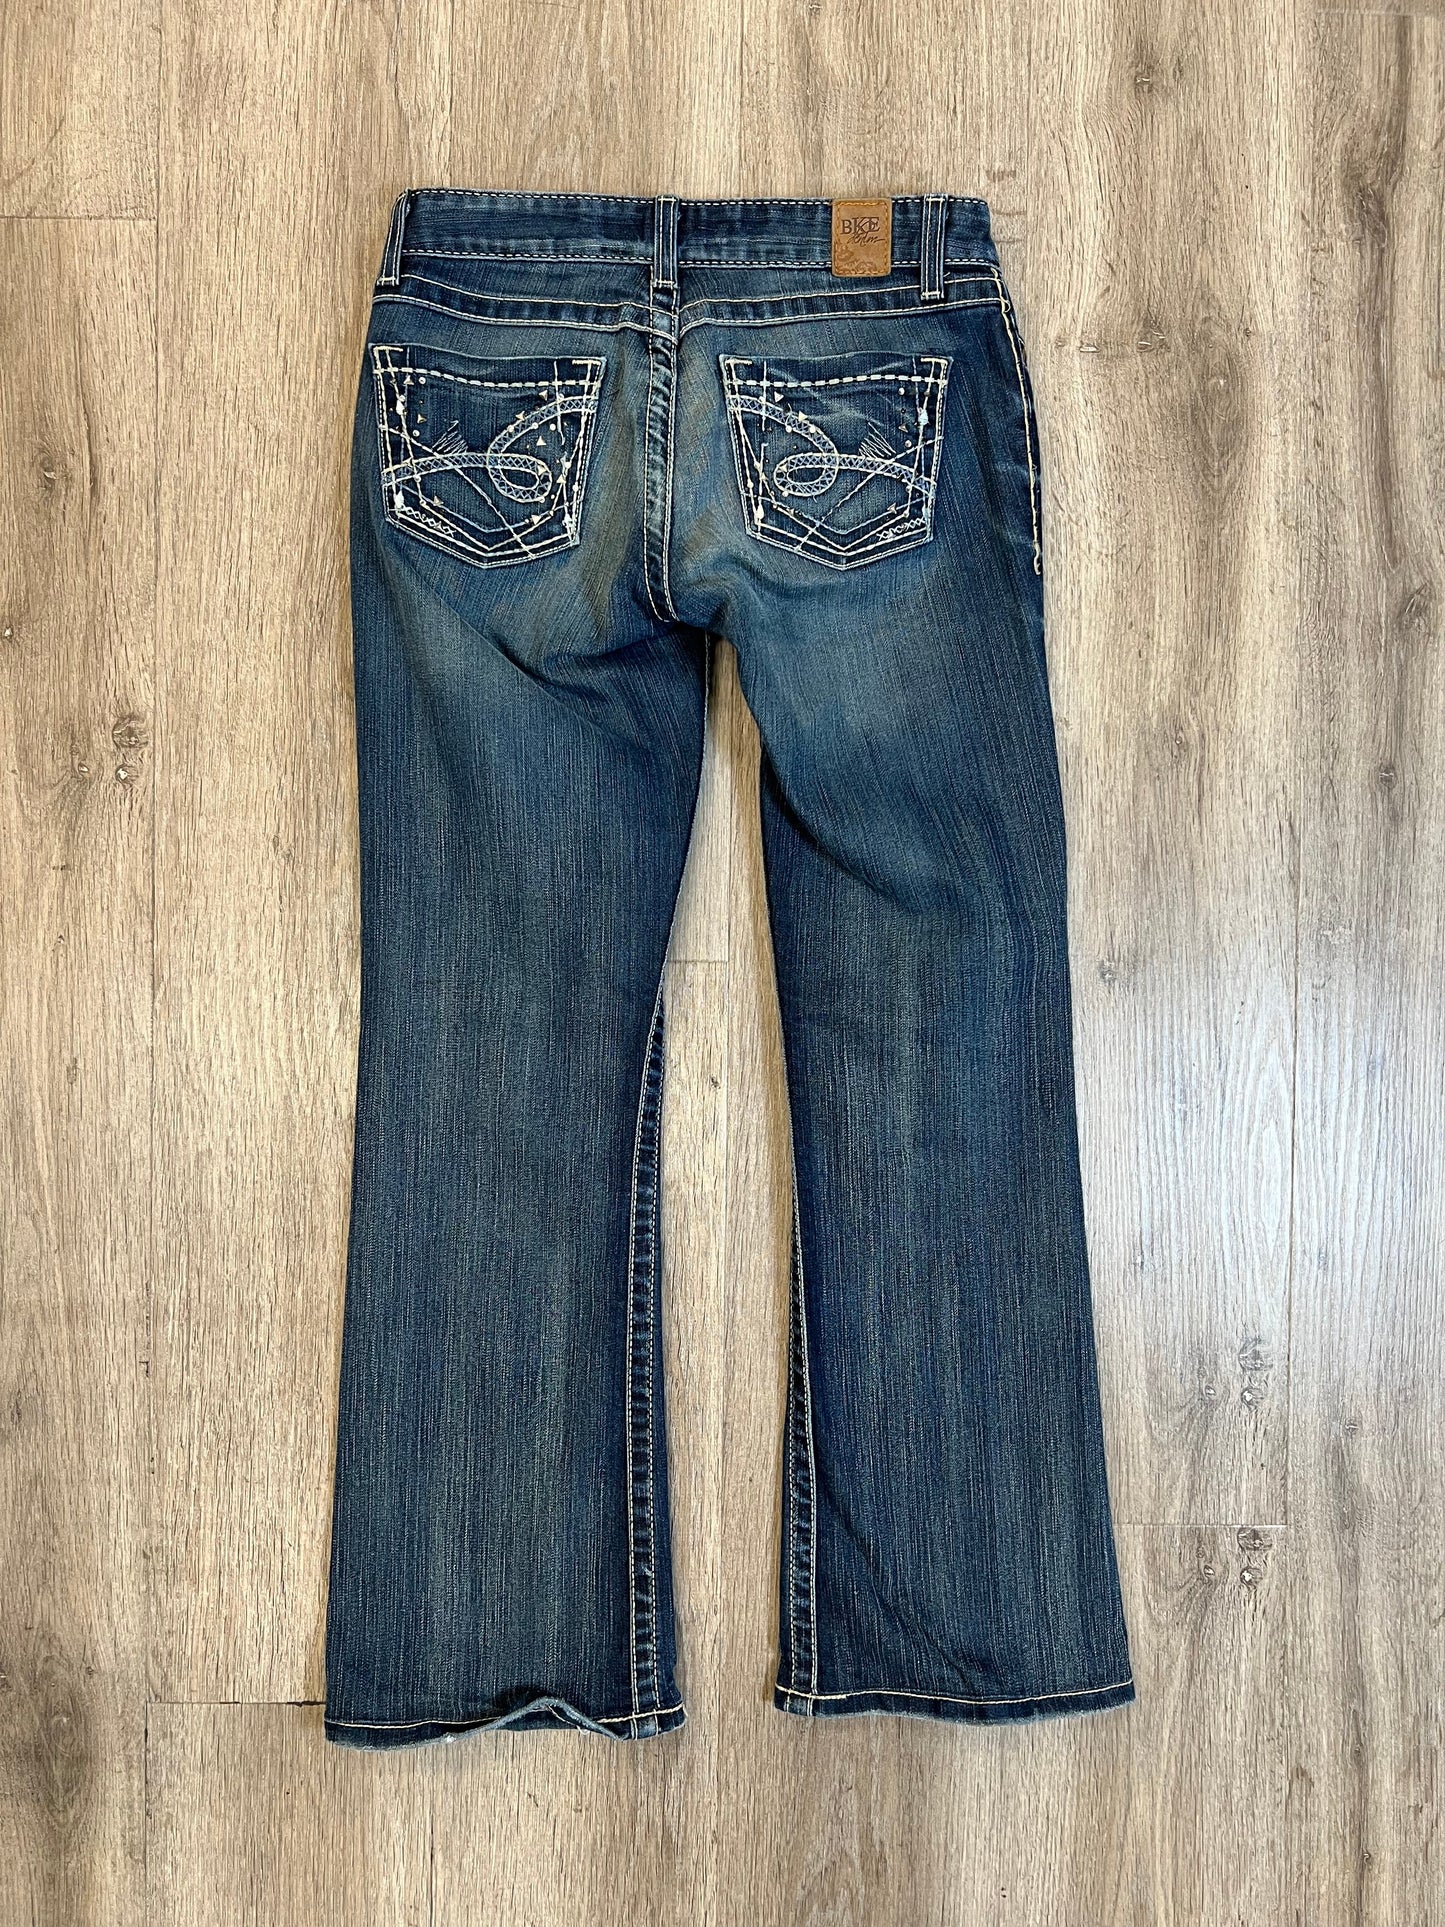 Jeans Boot Cut By Bke  Size: 4